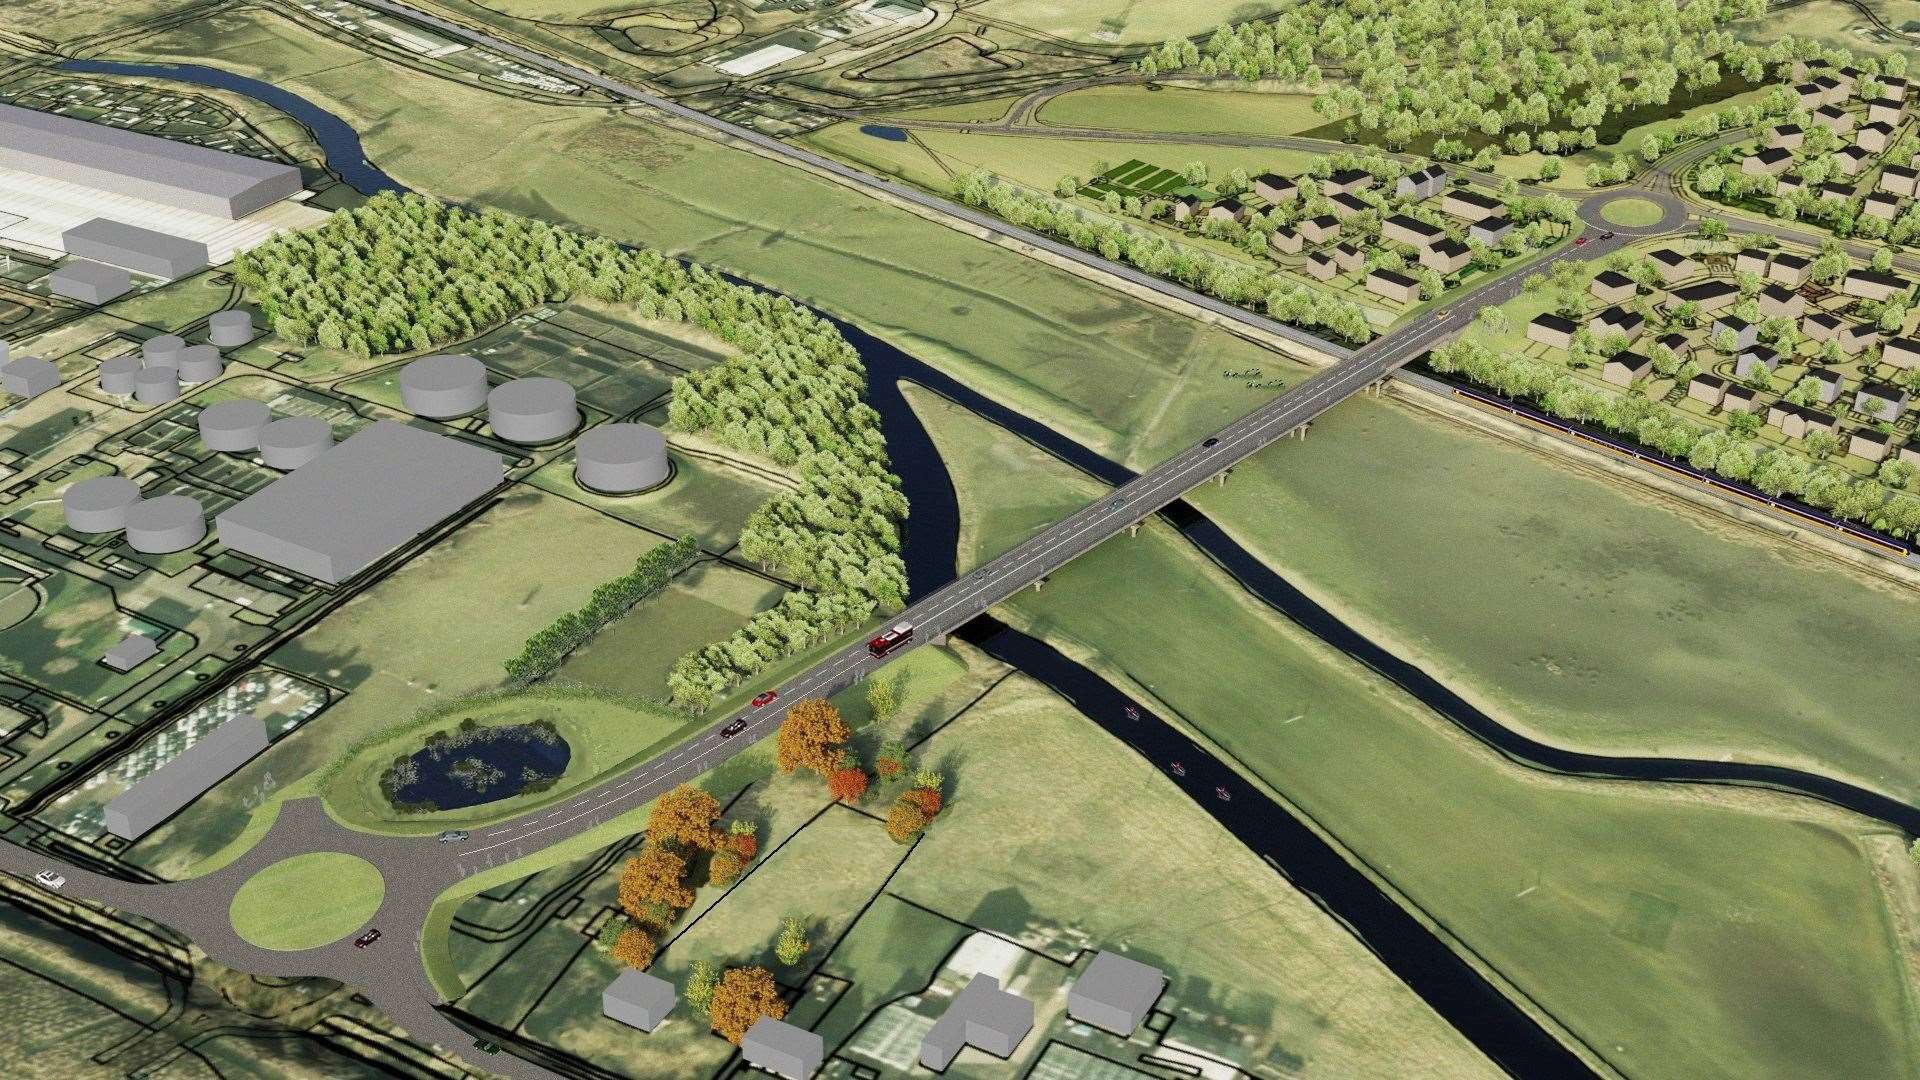 The proposed Sturry Link Road